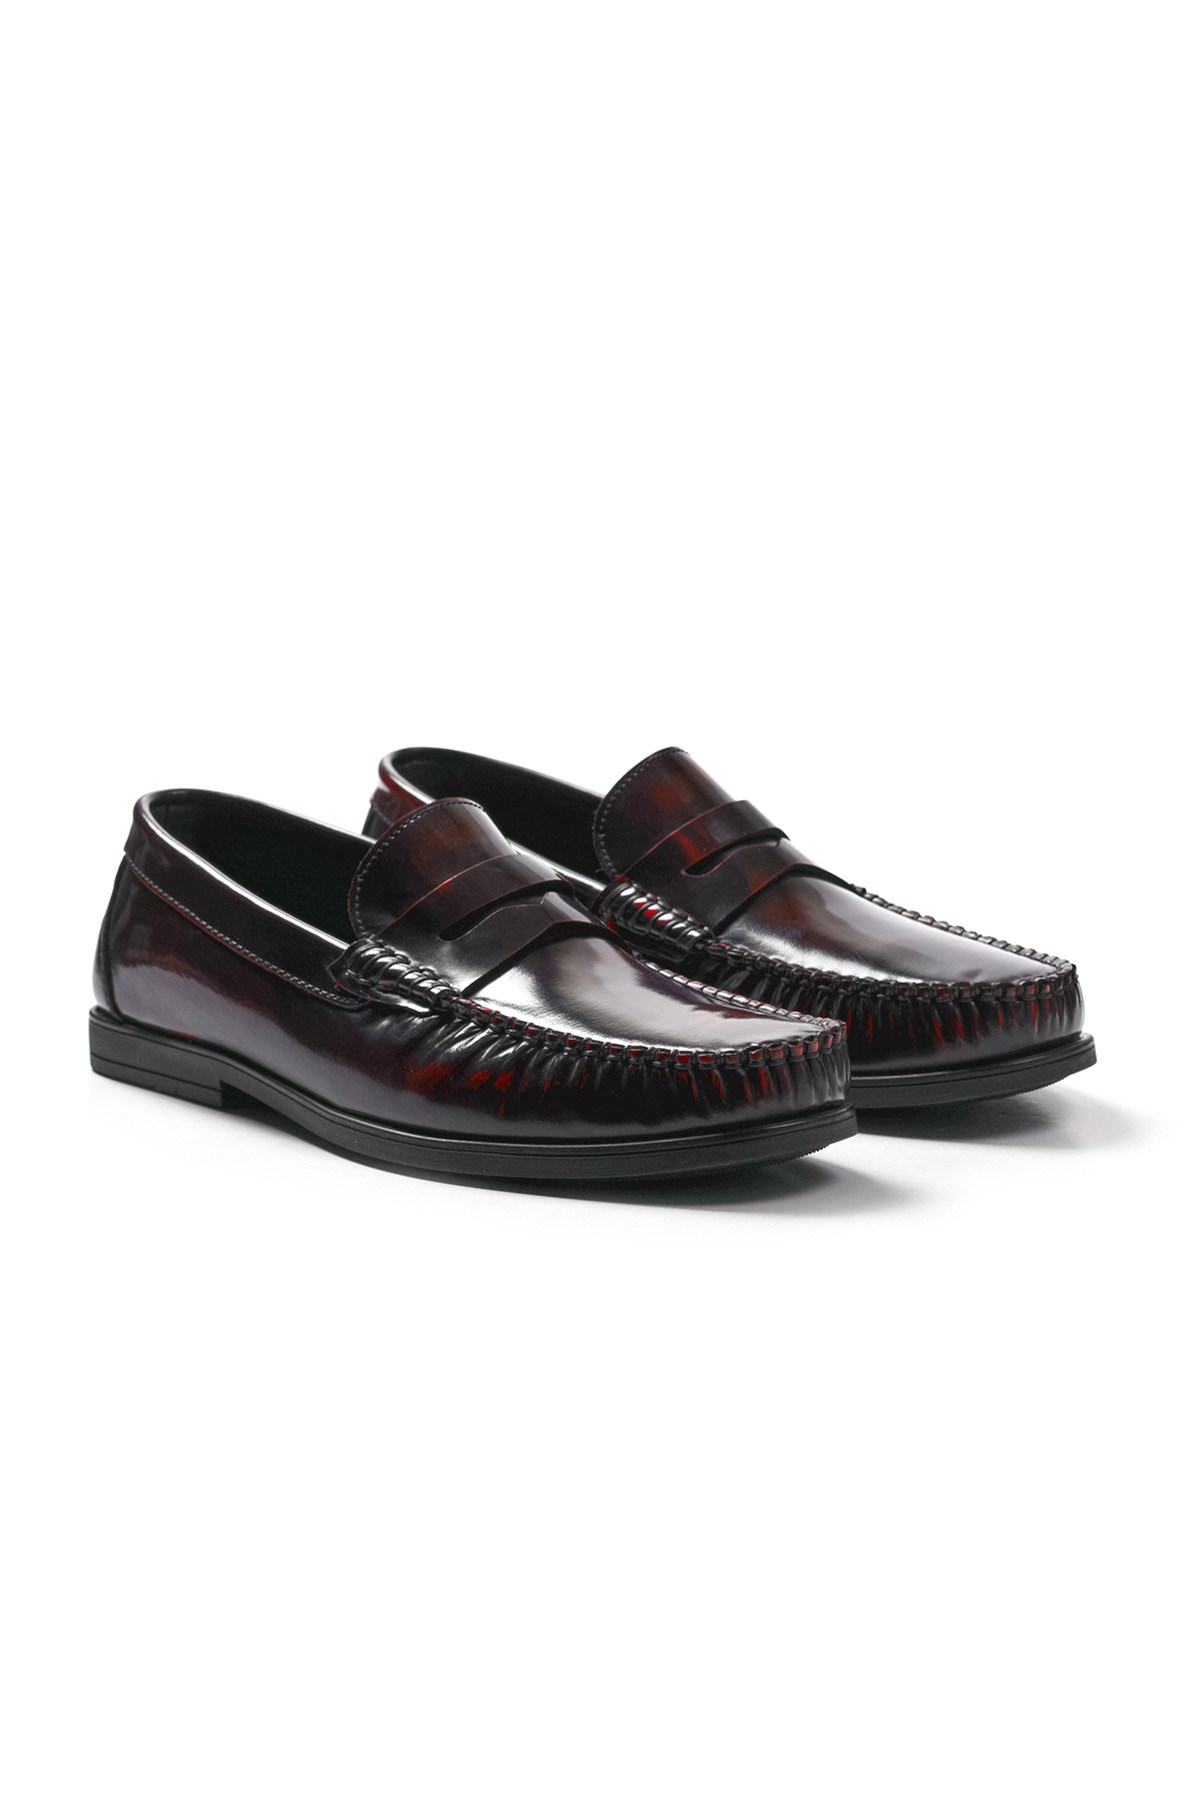 Cordelion Inside Outside Genuine Claret Red Opening Leather Laceless Loafer College Men's Shoes